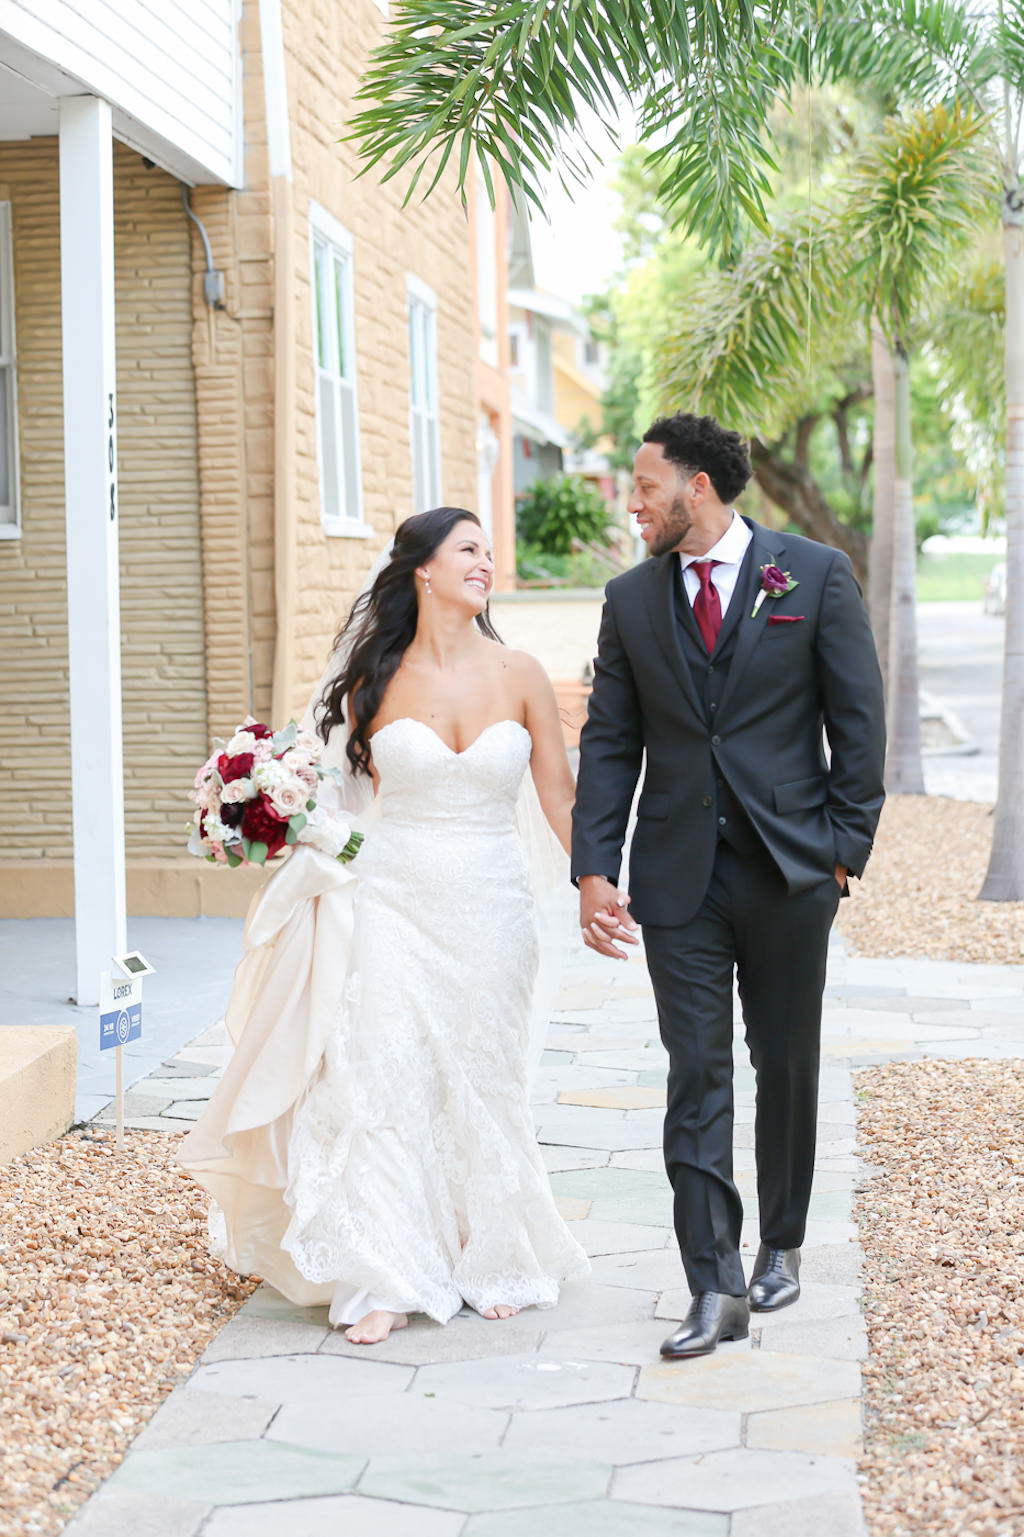 Romantic Tampa Bride in Lace Sweetheart Strapless Neckline Essense of Australia Wedding Dress Holding Wine Red and Blush Pink Roses Floral Bouquet, Groom in Gray Suit with Red Wine Tie and Rose Boutonniere | Wedding Photographer Lifelong Photography Studios